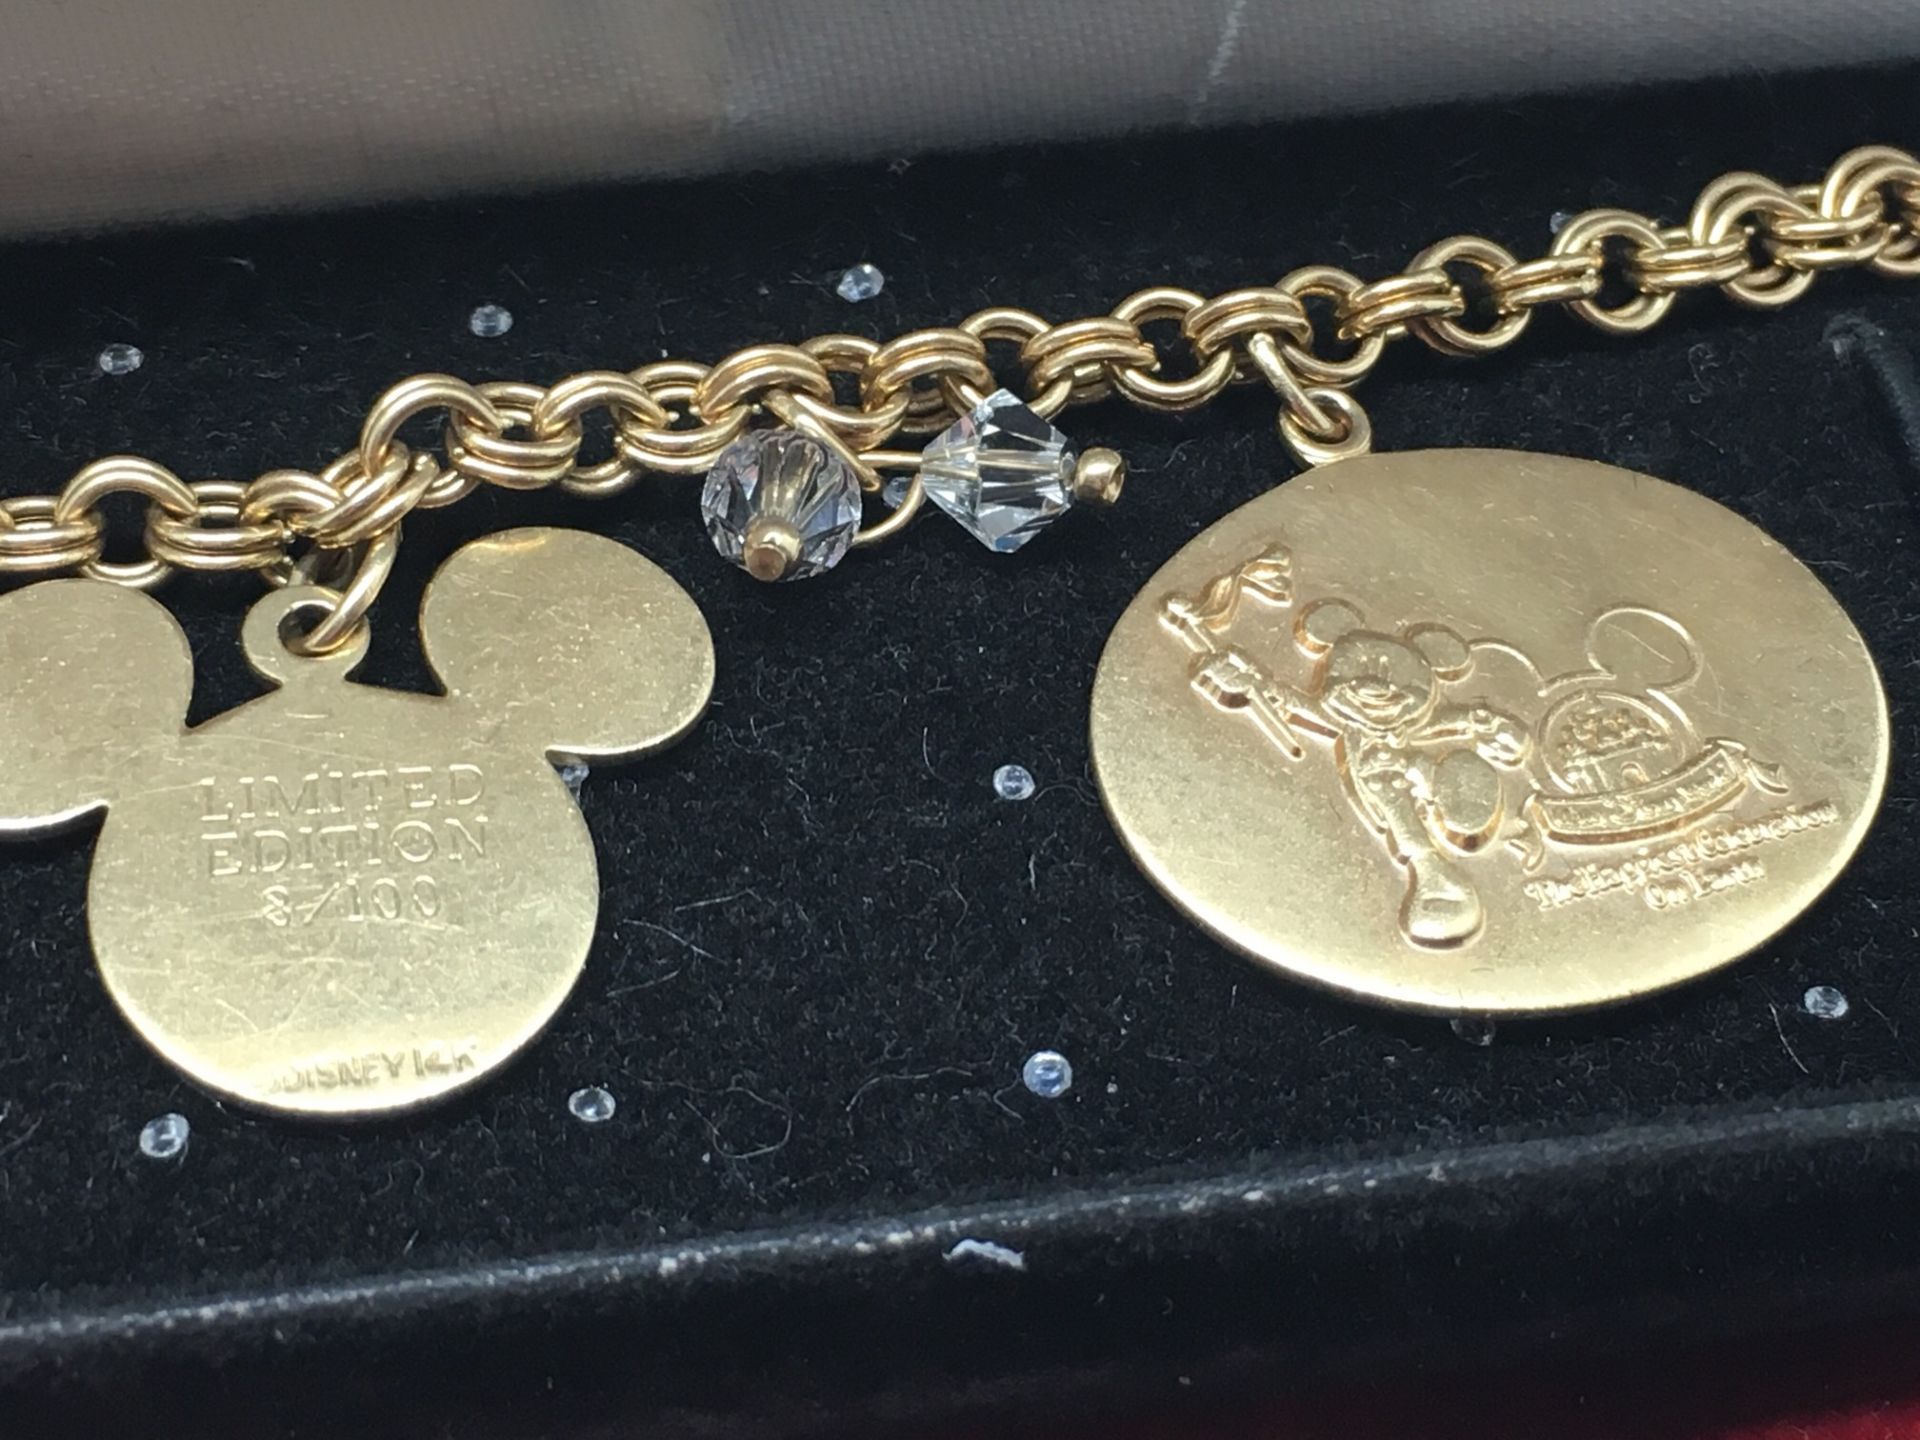 RARE LTD EDITION DISNEY WORLD CHARM BRACELET NO: 8 OUT OF 100 YELLOW METAL MARKED 14k TESTED AS 14K - Image 3 of 4